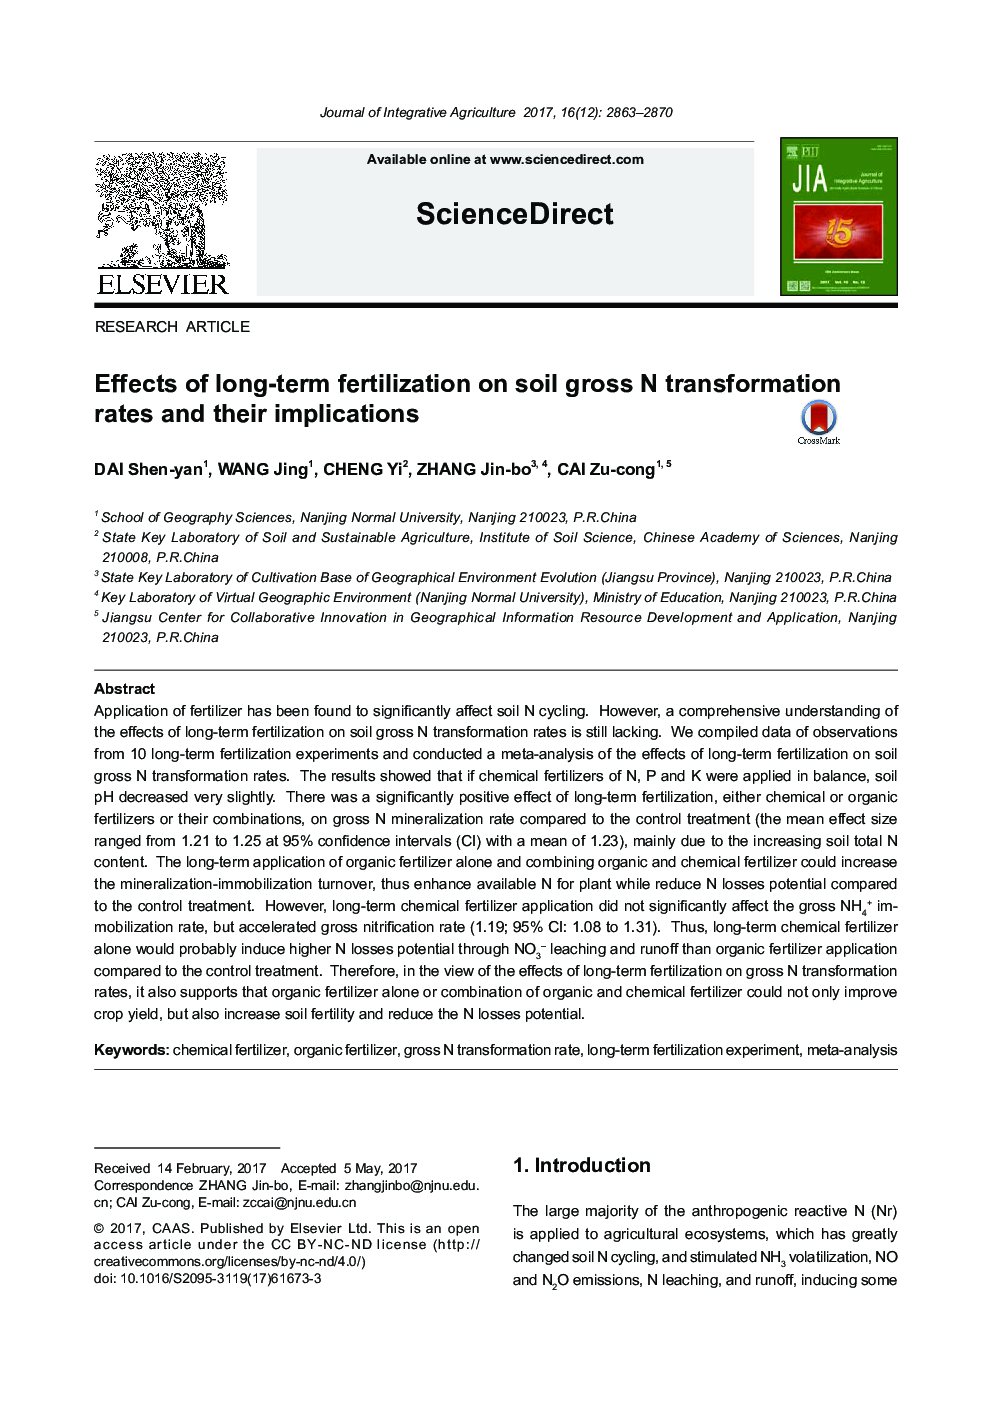 Effects of long-term fertilization on soil gross N transformation rates and their implications